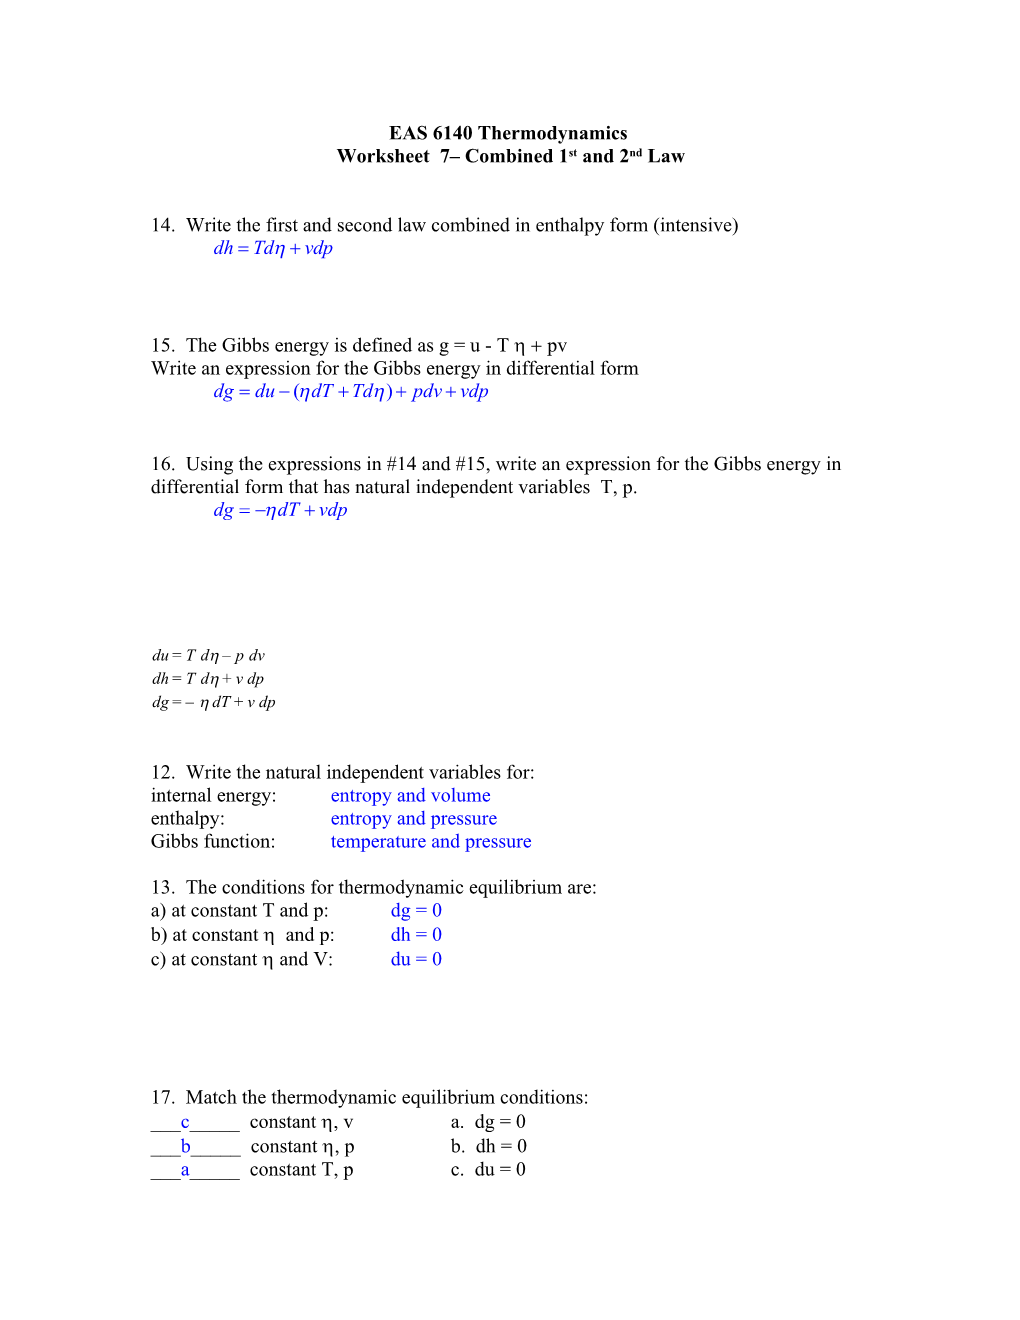 Worksheet 7 Combined 1St and 2Nd Law